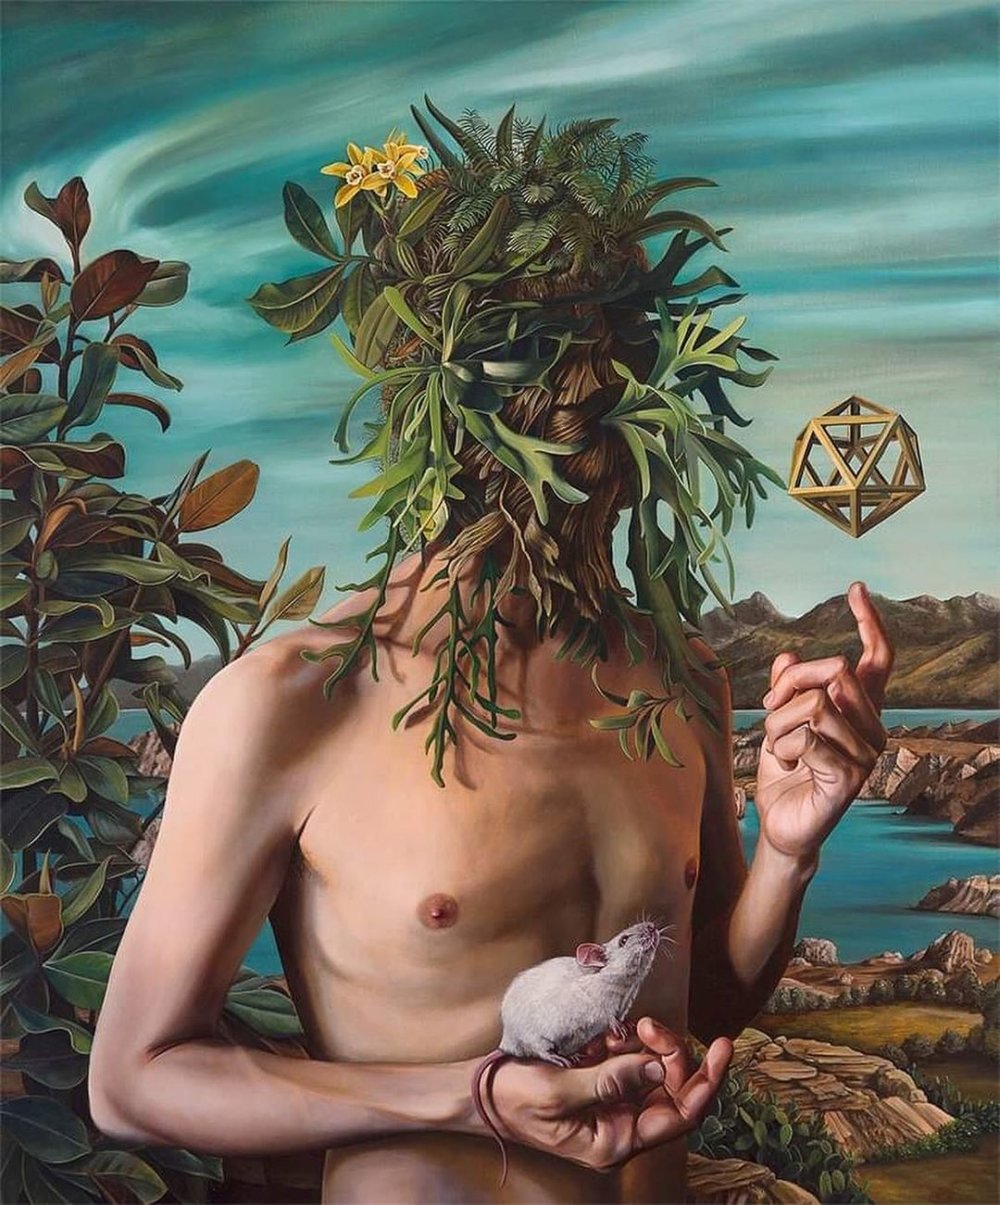 Sacred Plants Surreal Oil Paintings Of People Fused With Nature By Alejandro Pasquale 1